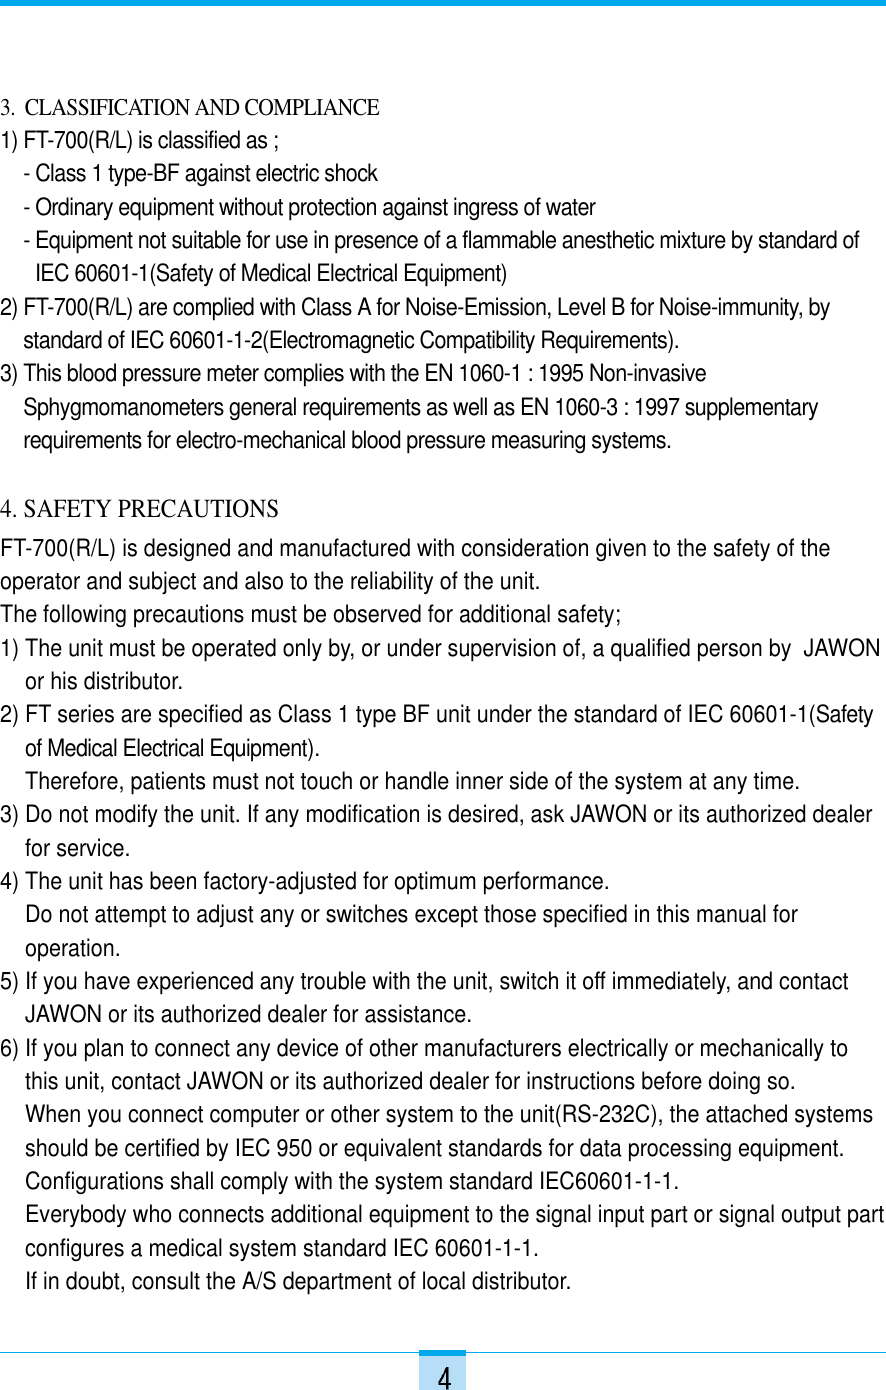 3.  CLASSIFICATION AND COMPLIANCE1) FT-700(R/L) is classified as ;- Class 1 type-BF against electric shock- Ordinary equipment without protection against ingress of water - Equipment not suitable for use in presence of a flammable anesthetic mixture by standard ofIEC 60601-1(Safety of Medical Electrical Equipment)2) FT-700(R/L) are complied with Class A for Noise-Emission, Level B for Noise-immunity, by standard of IEC 60601-1-2(Electromagnetic Compatibility Requirements).3) This blood pressure meter complies with the EN 1060-1 : 1995 Non-invasiveSphygmomanometers general requirements as well as EN 1060-3 : 1997 supplementaryrequirements for electro-mechanical blood pressure measuring systems.4. SAFETY PRECAUTIONSFT-700(R/L) is designed and manufactured with consideration given to the safety of theoperator and subject and also to the reliability of the unit.The following precautions must be observed for additional safety;1) The unit must be operated only by, or under supervision of, a qualified person by  JAWONor his distributor.2) FT series are specified as Class 1 type BF unit under the standard of IEC 60601-1(Safetyof Medical Electrical Equipment).Therefore, patients must not touch or handle inner side of the system at any time.3) Do not modify the unit. If any modification is desired, ask JAWON or its authorized dealerfor service.4) The unit has been factory-adjusted for optimum performance. Do not attempt to adjust any or switches except those specified in this manual foroperation.5) If you have experienced any trouble with the unit, switch it off immediately, and contactJAWON or its authorized dealer for assistance.6) If you plan to connect any device of other manufacturers electrically or mechanically tothis unit, contact JAWON or its authorized dealer for instructions before doing so.When you connect computer or other system to the unit(RS-232C), the attached systemsshould be certified by IEC 950 or equivalent standards for data processing equipment.Configurations shall comply with the system standard IEC60601-1-1. Everybody who connects additional equipment to the signal input part or signal output partconfigures a medical system standard IEC 60601-1-1. If in doubt, consult the A/S department of local distributor.